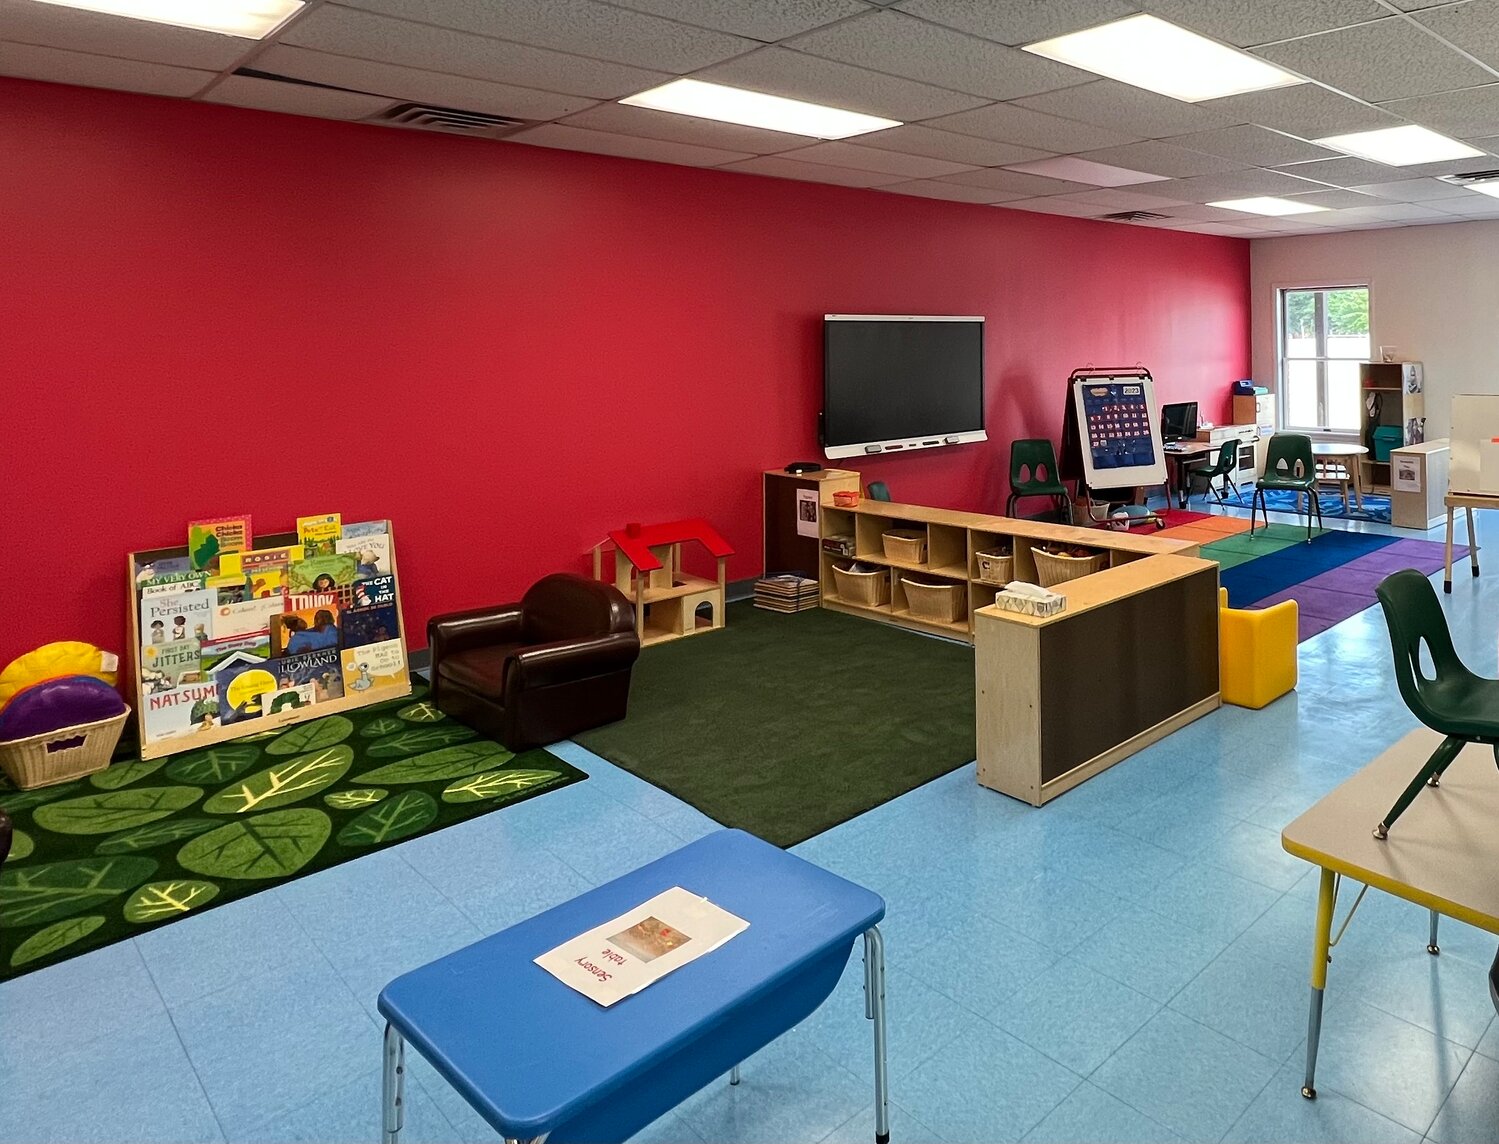 The Bucks County Intermediate Unit’s new Early Learning Center classroom on the campus of the Lower Bucks Hospital in Bristol opened Aug. 28.